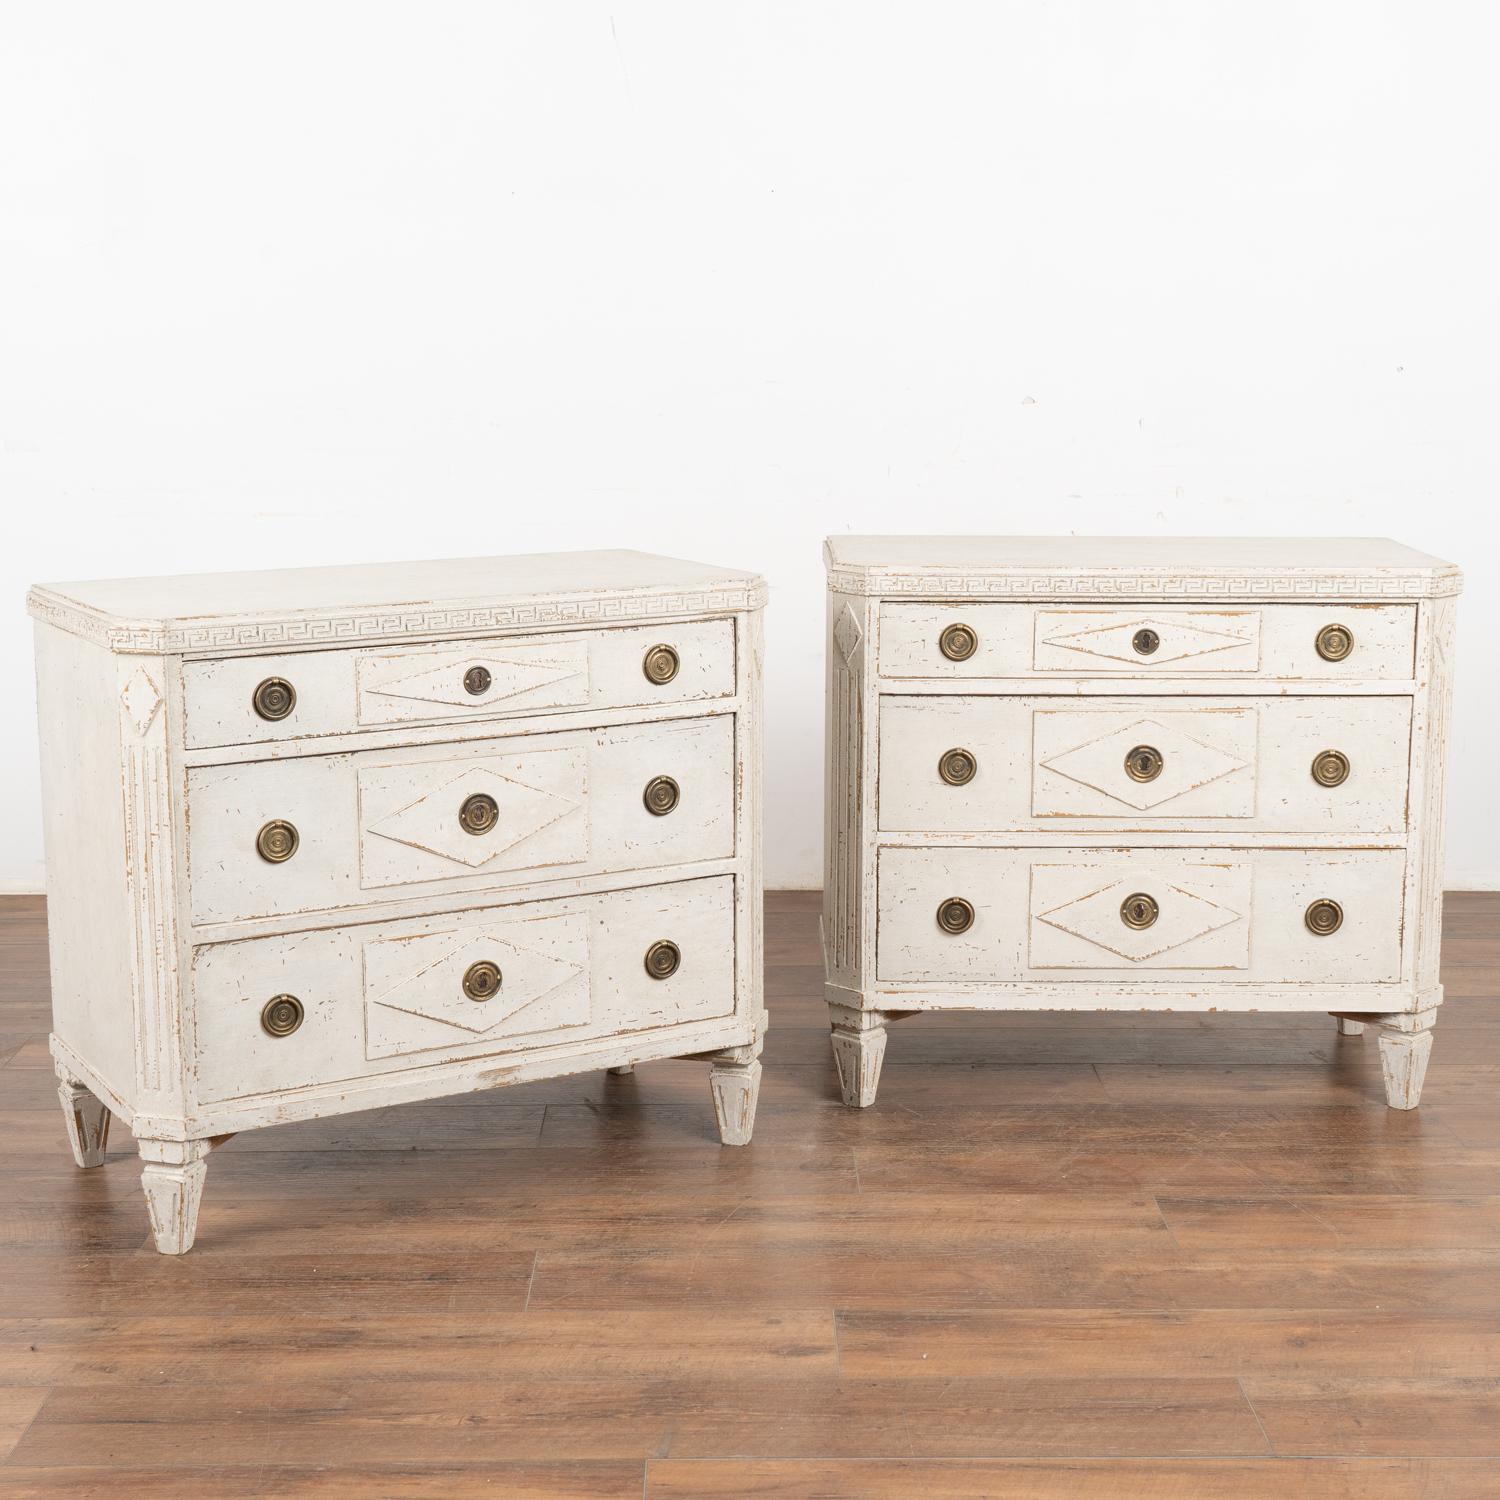 A pair of decorative Gustavian pine chest of drawers painted in shades of  antique white with Greek key motif carved in upper top molding.
Canted fluted side posts with upper carved diamond medallion, raised panels with traditional diamond motif